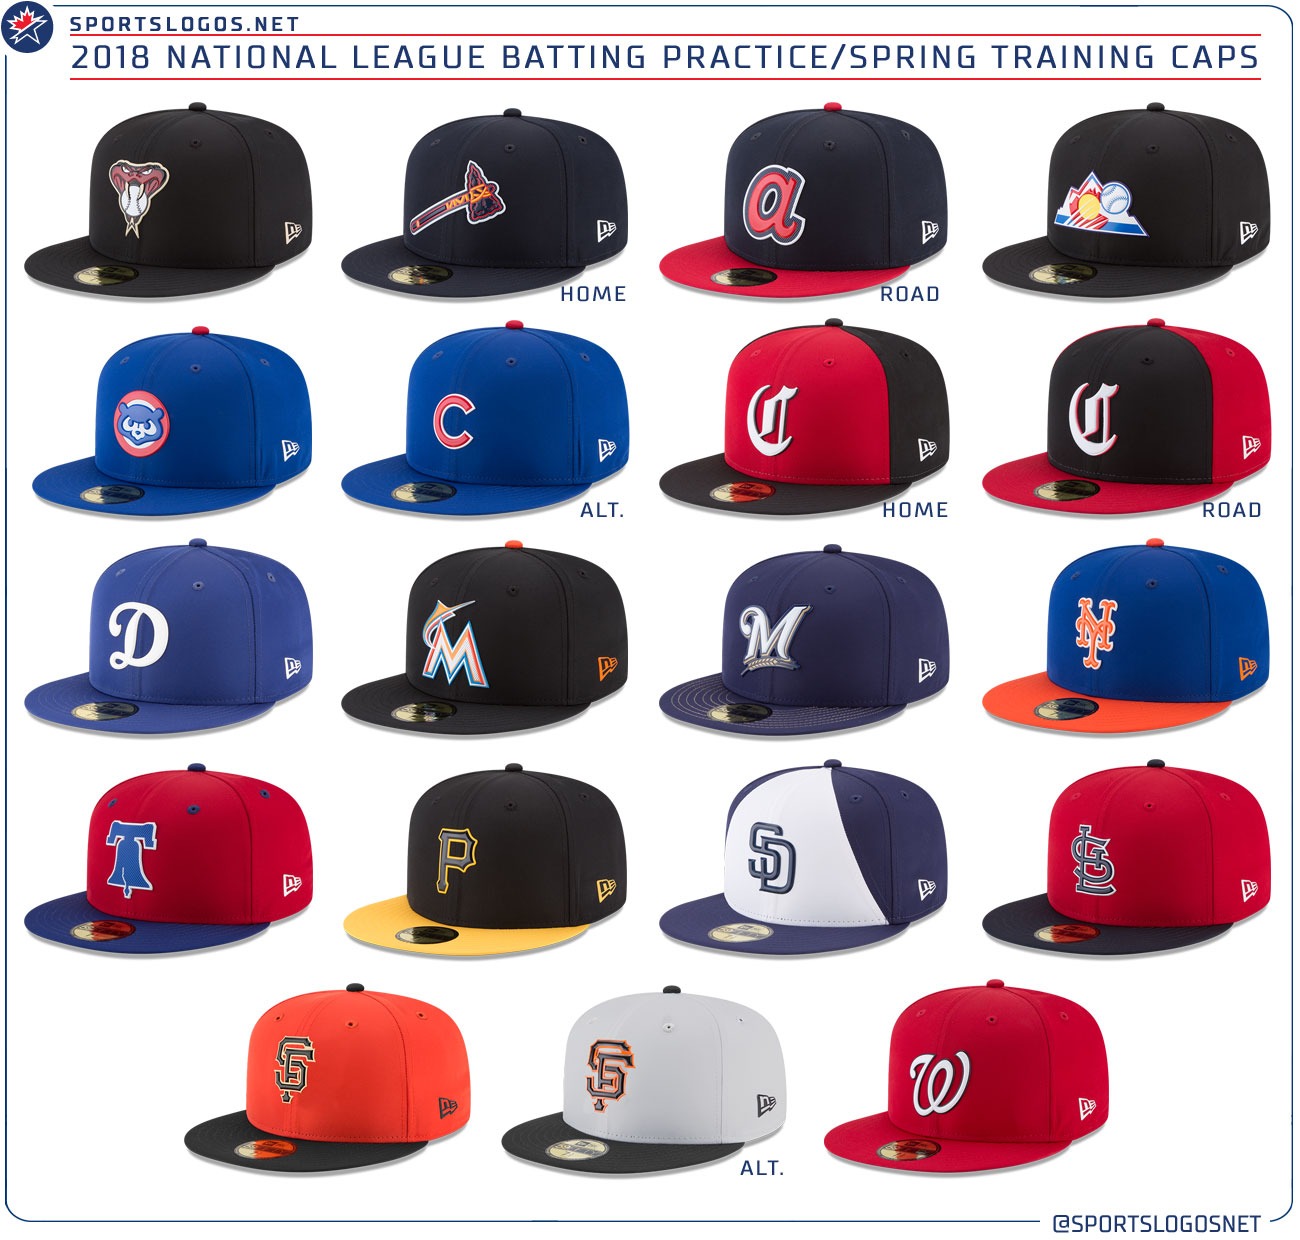 Check it out Spring training caps for all MLB teams revealed